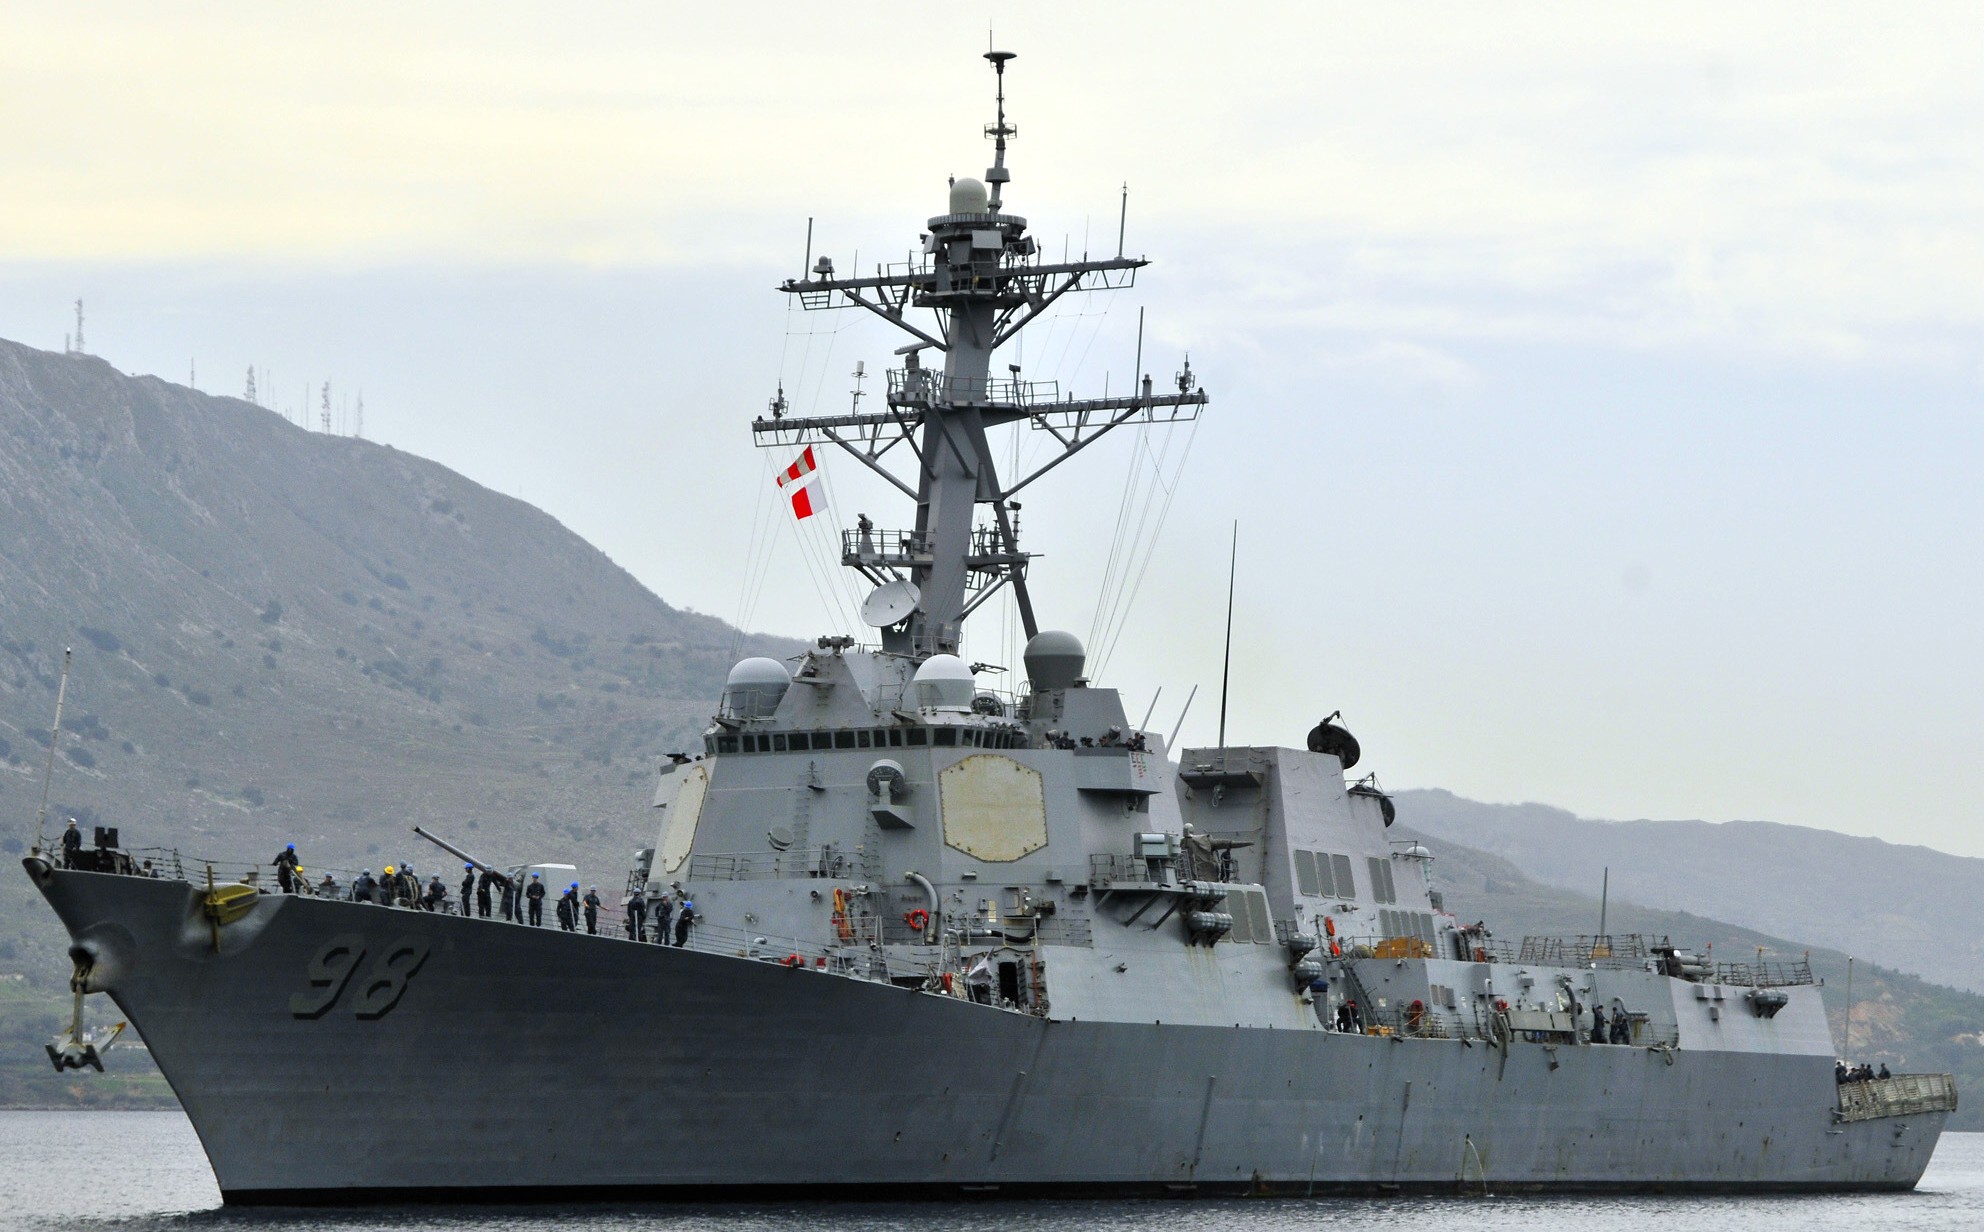 ddg-98 uss forrest sherman arleigh burke class guided missile destroyer aegis naval support activity souda bay crete greece 21